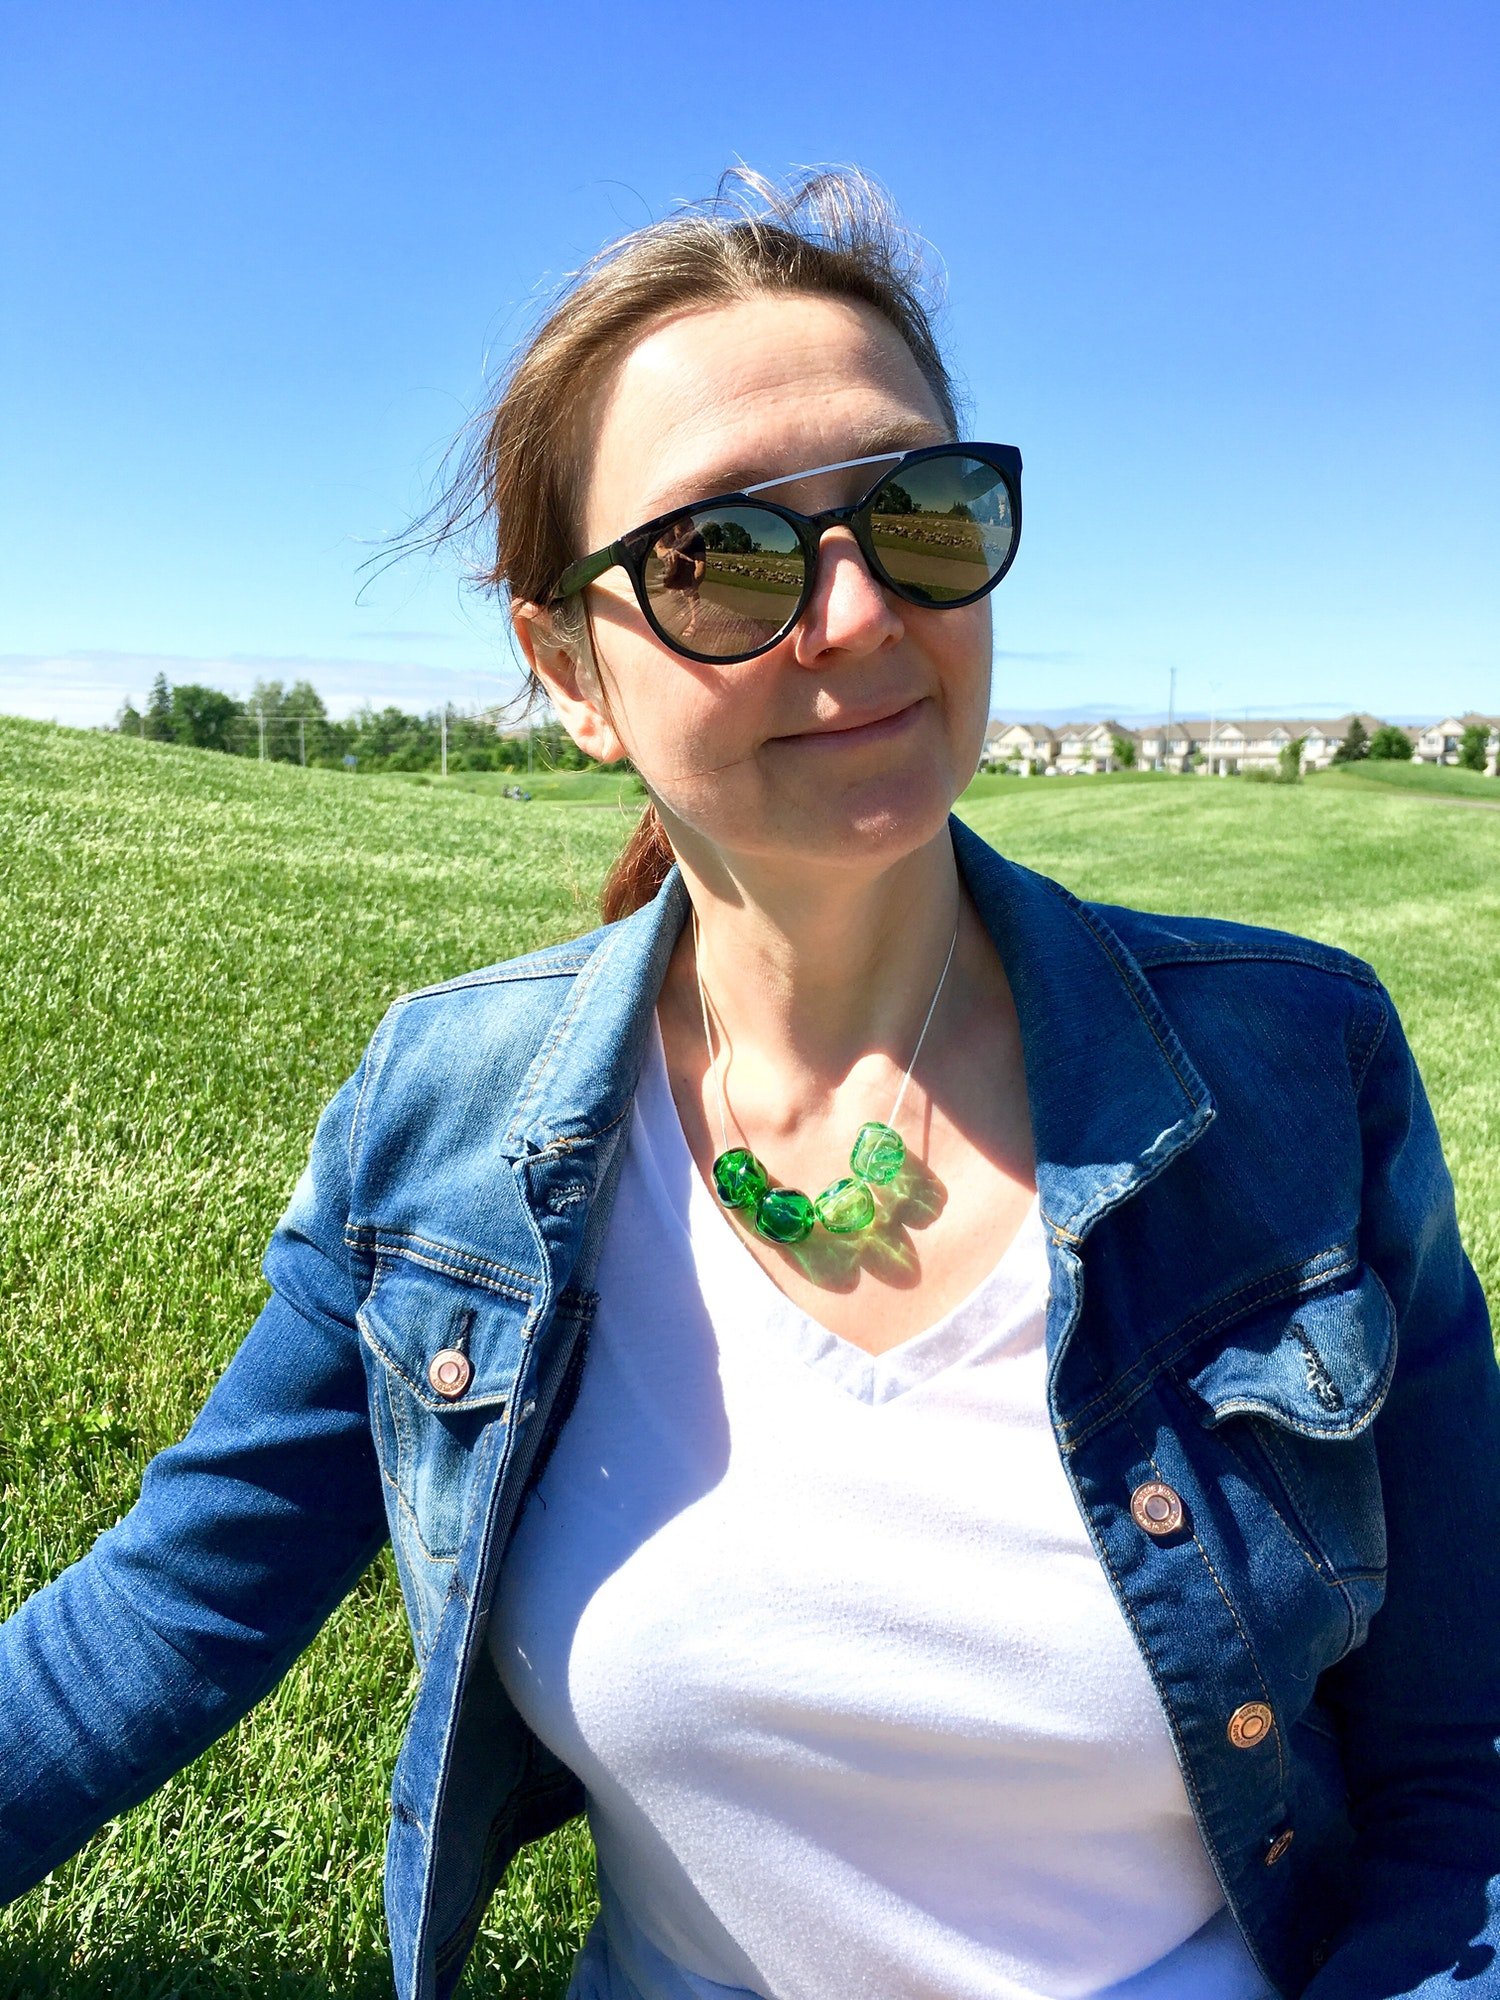 Middle aged woman outdoors wearing sunglasses